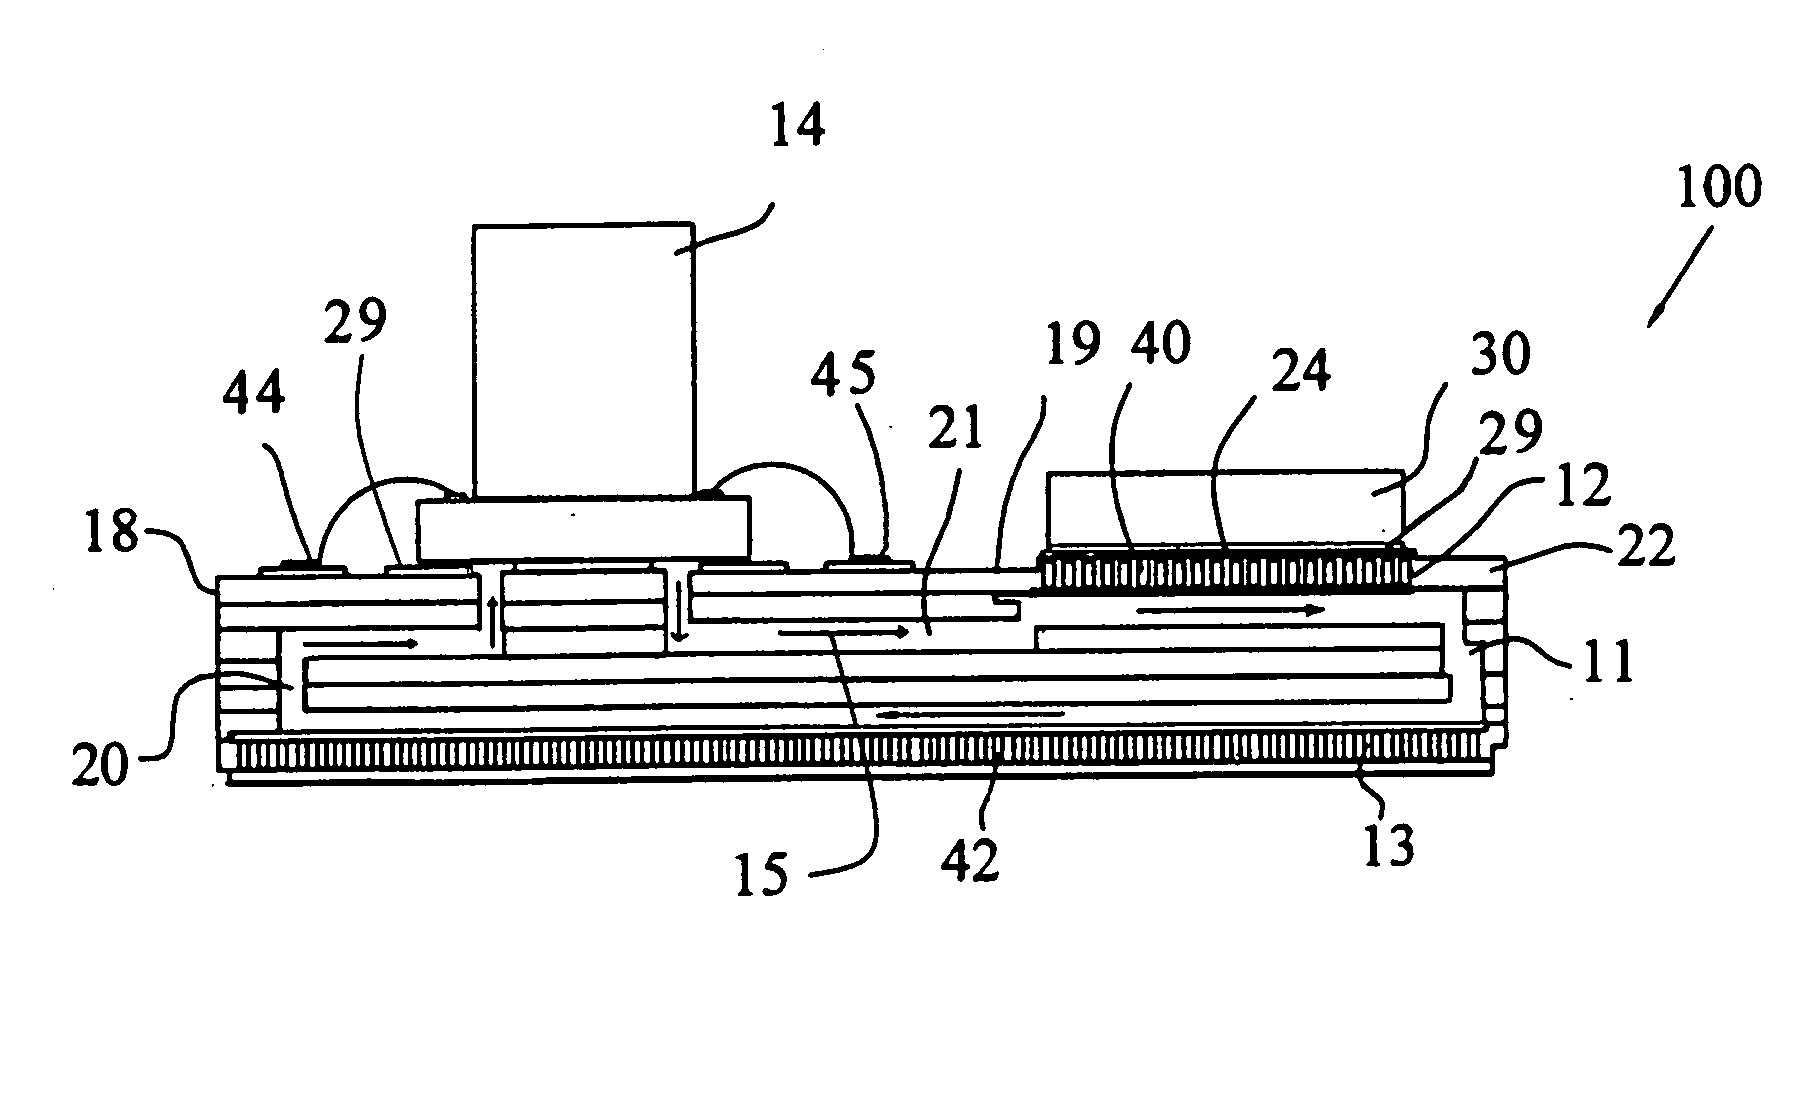 Integrated cooling system for electronic devices